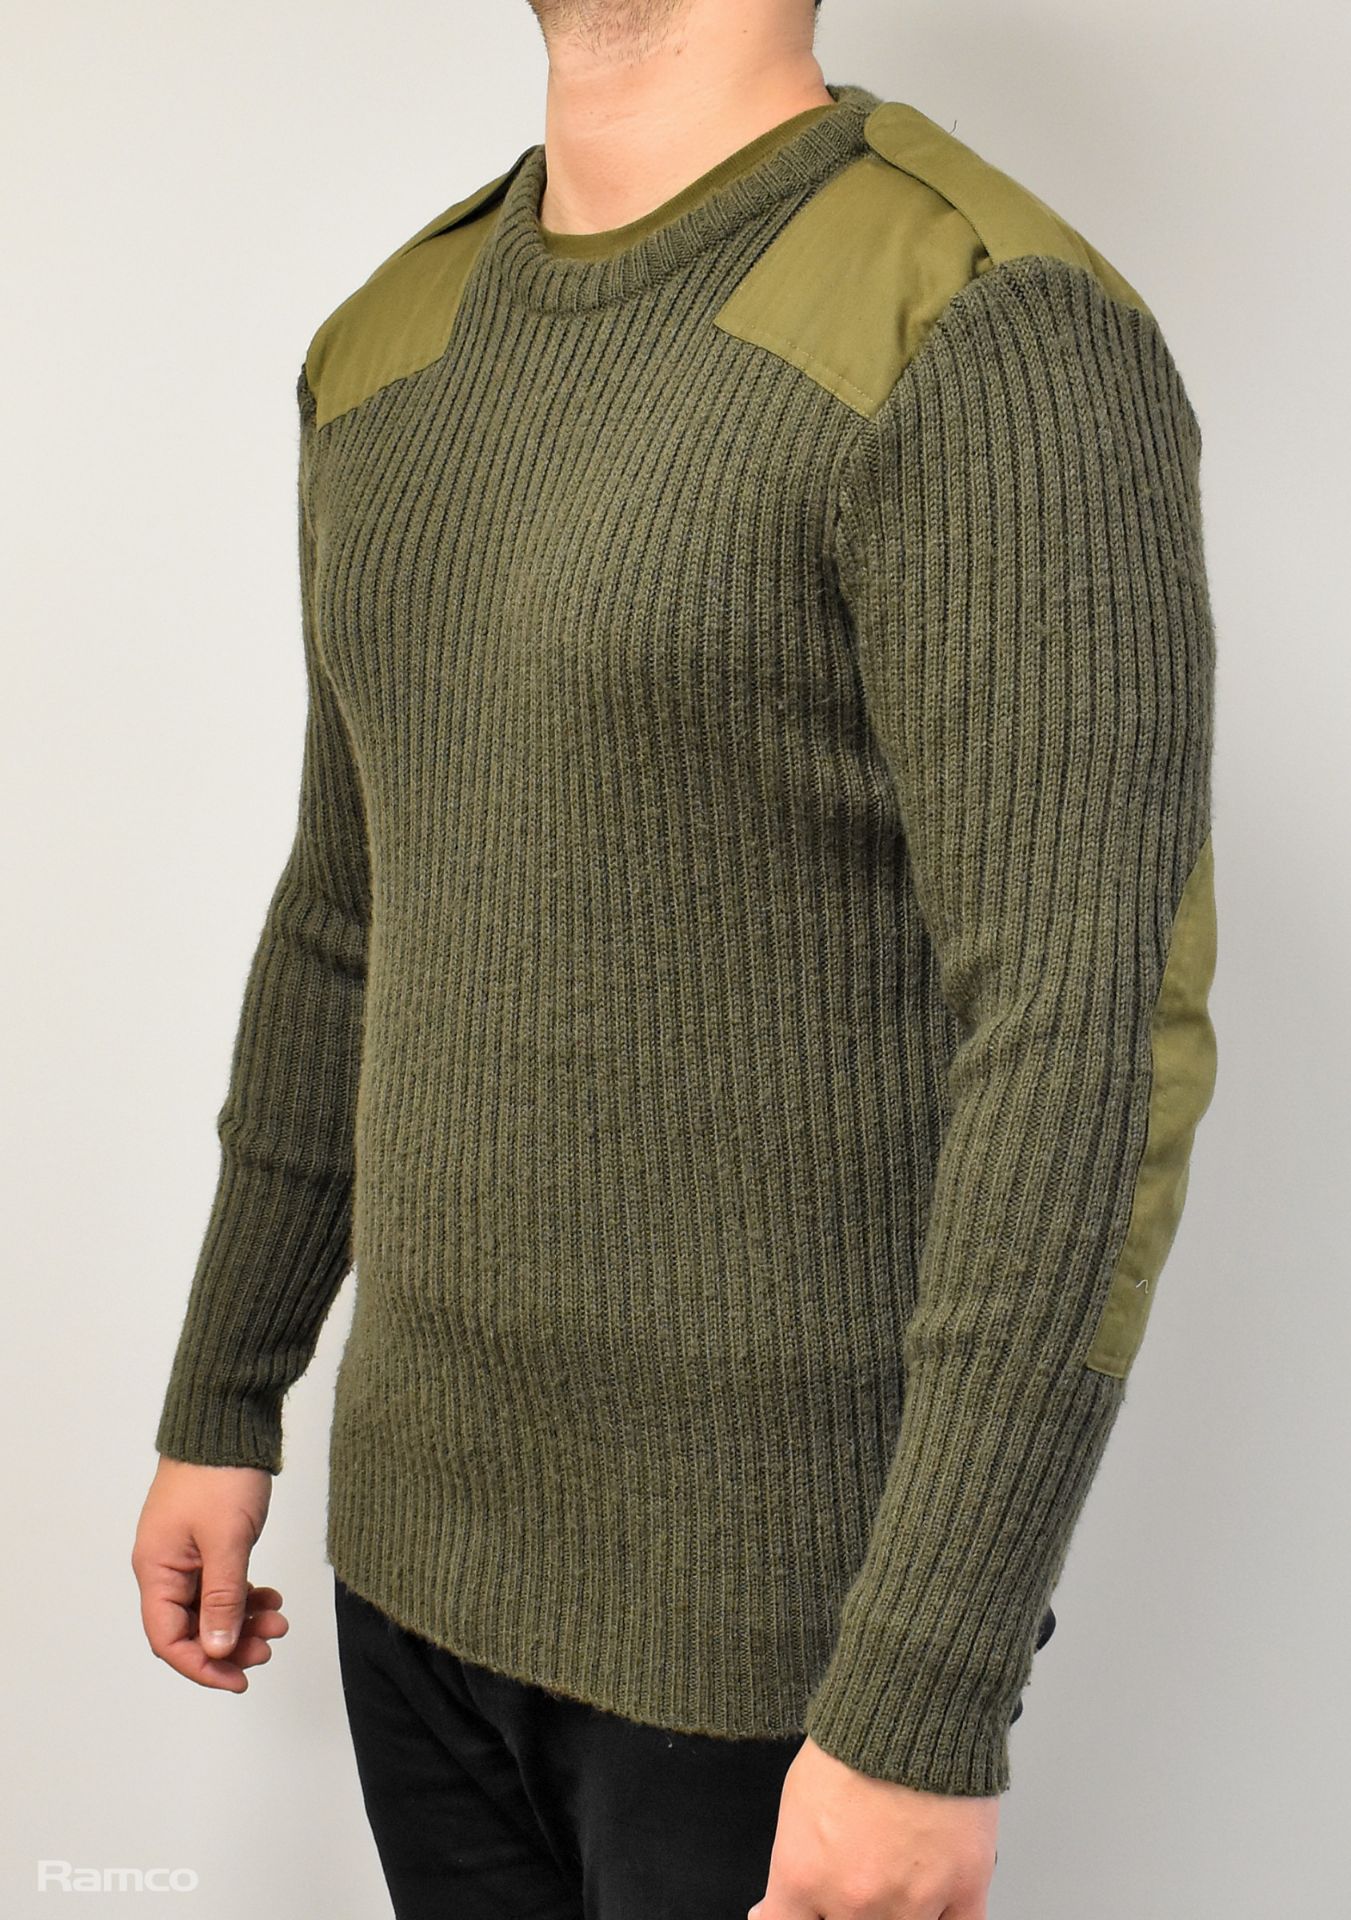 100x British Army wool jerseys - Olive - mixed grades and sizes - Image 2 of 9